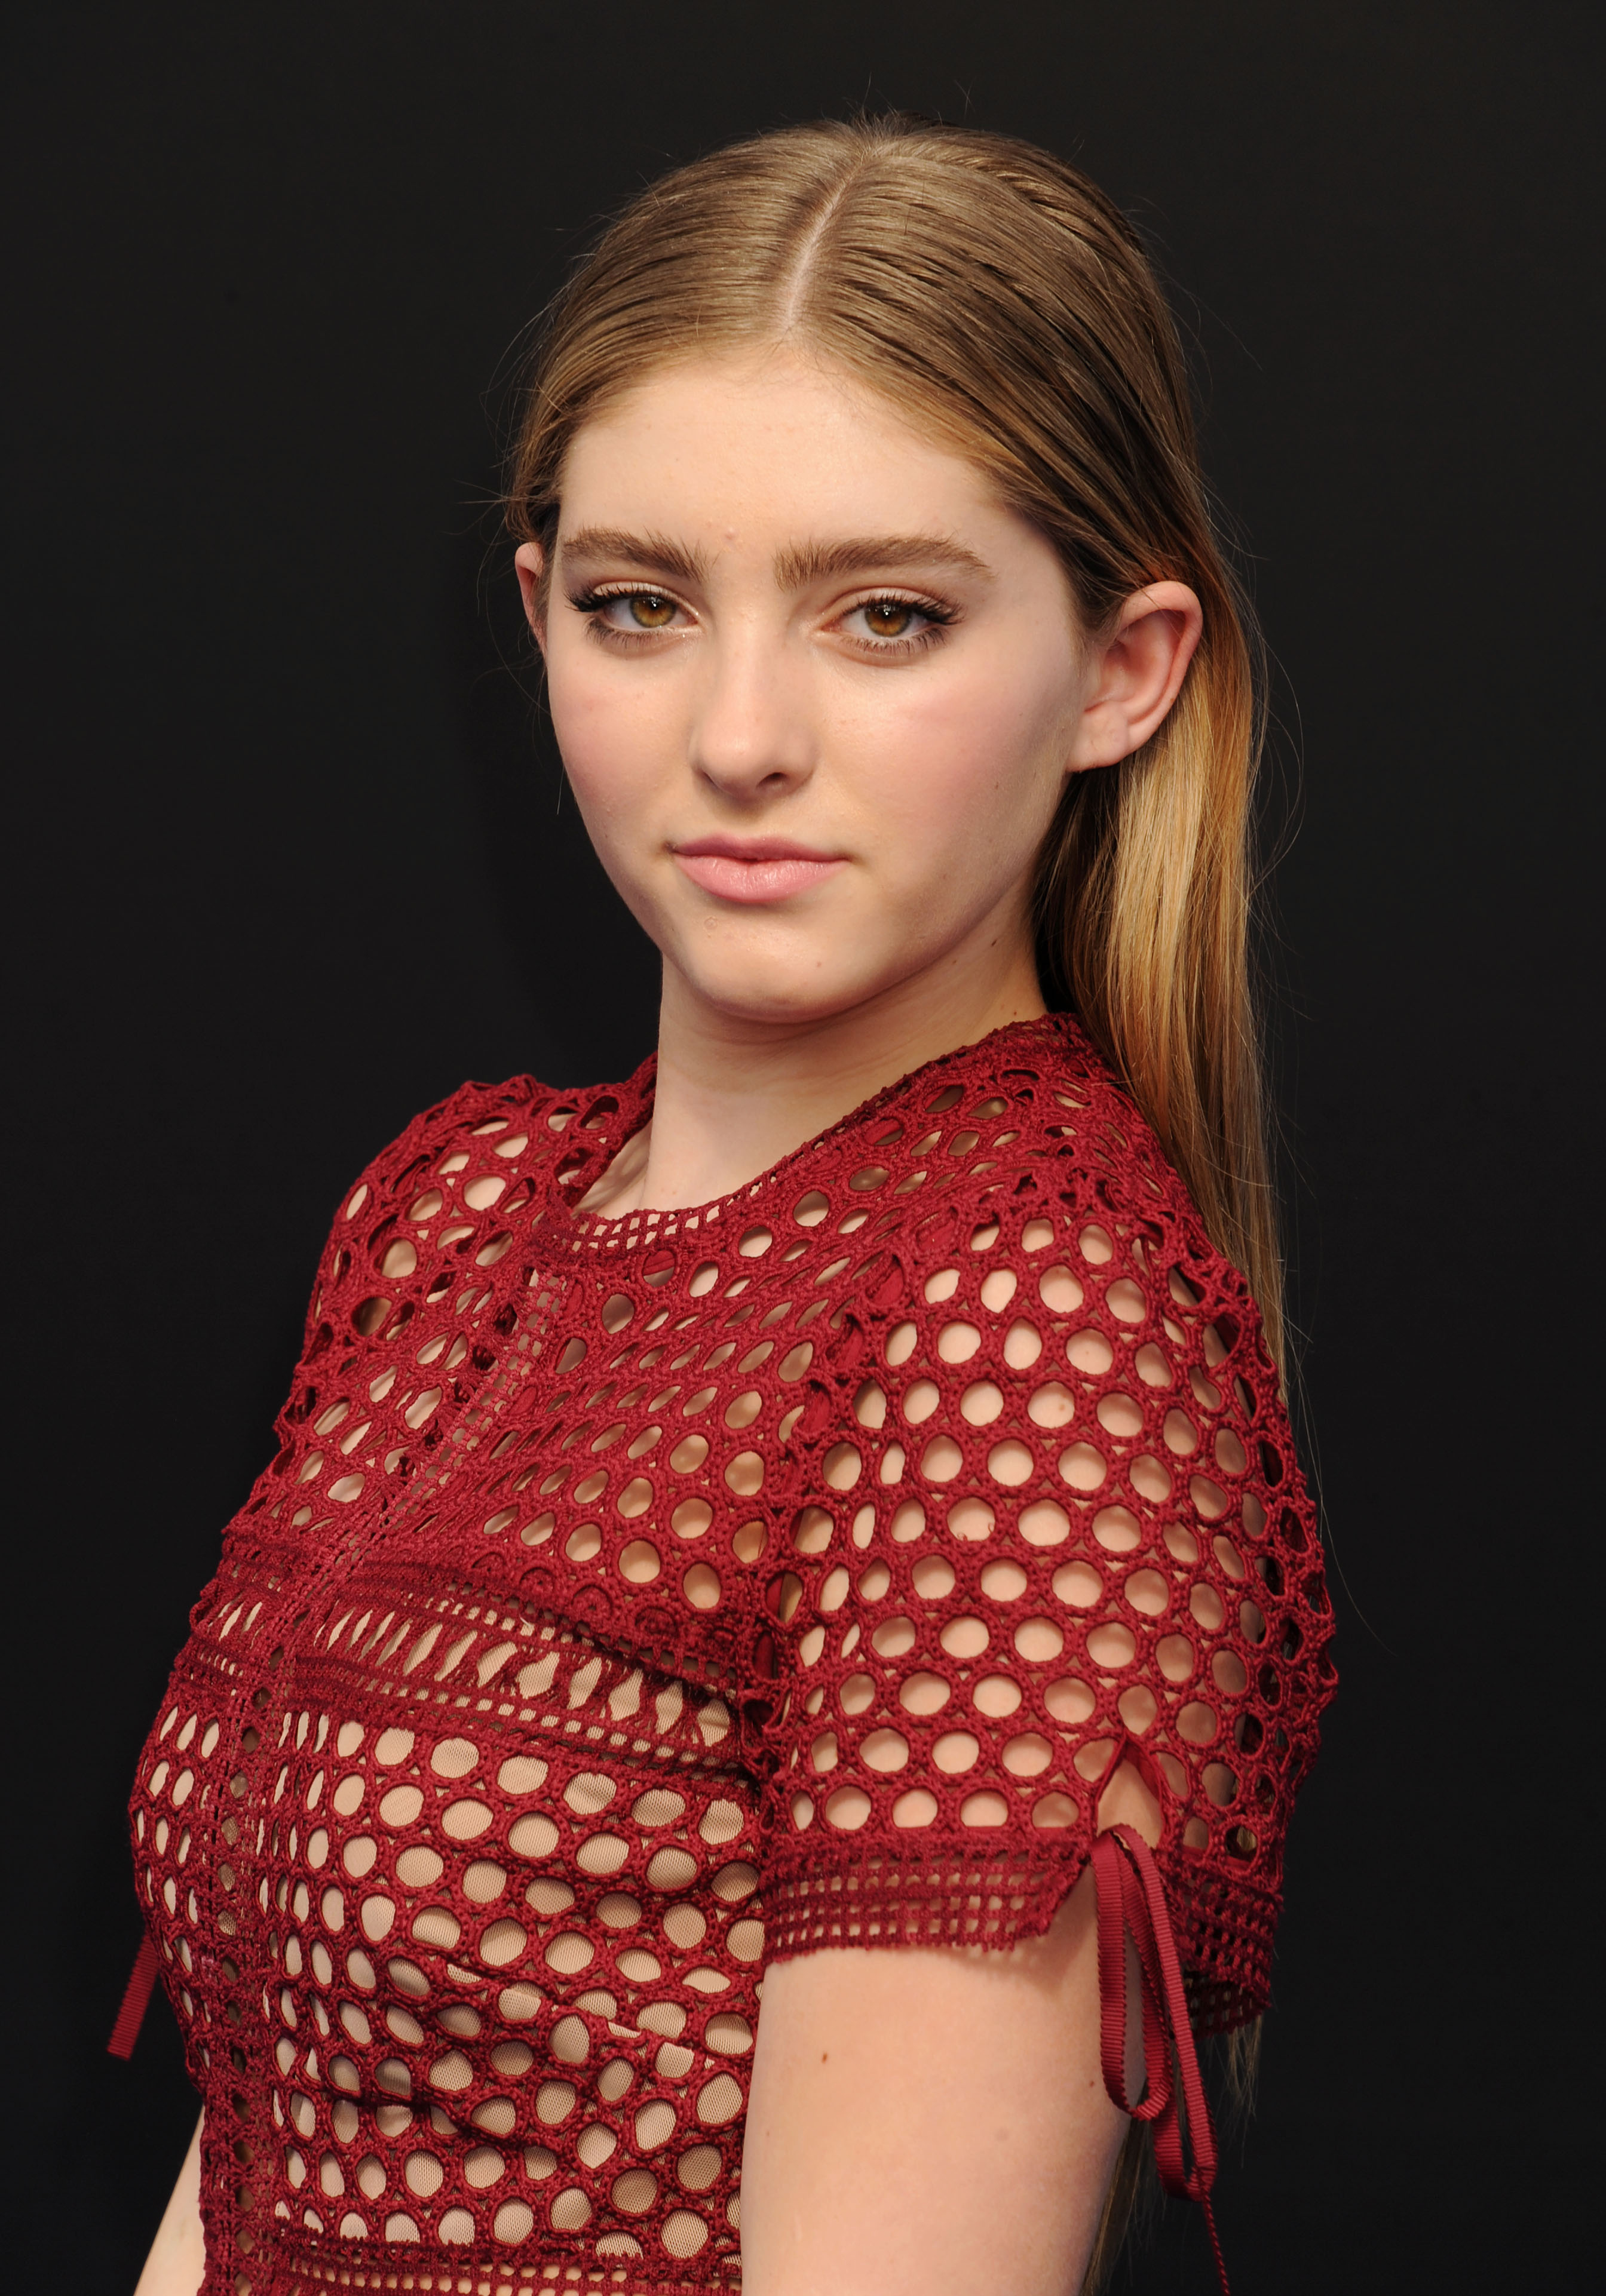 Willow Shields Images Hd